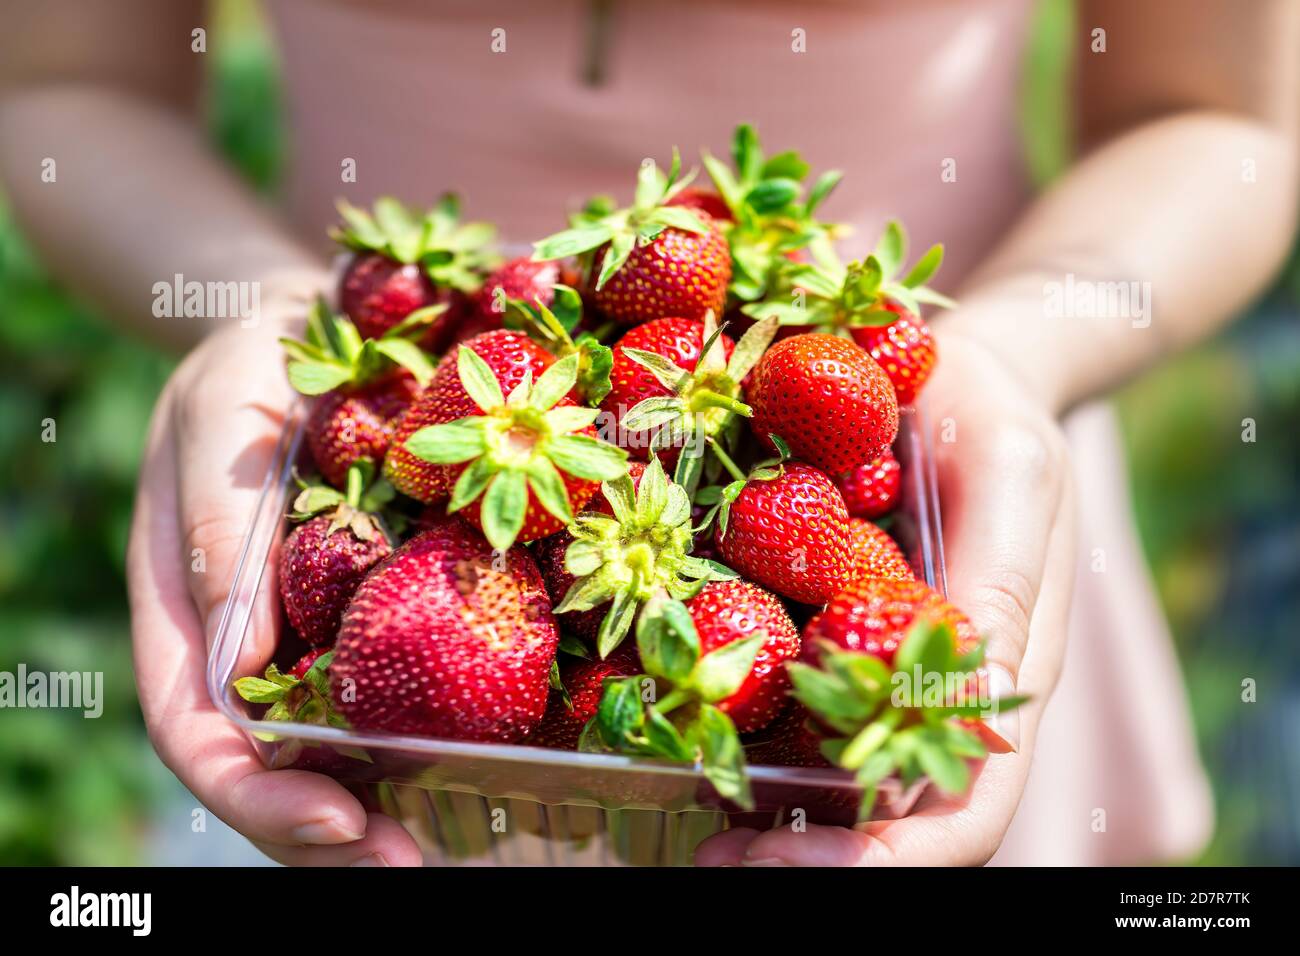 Farm summer countryside garden and woman young girl picking berries strawberries in pink dress with container full of red fruit Stock Photo